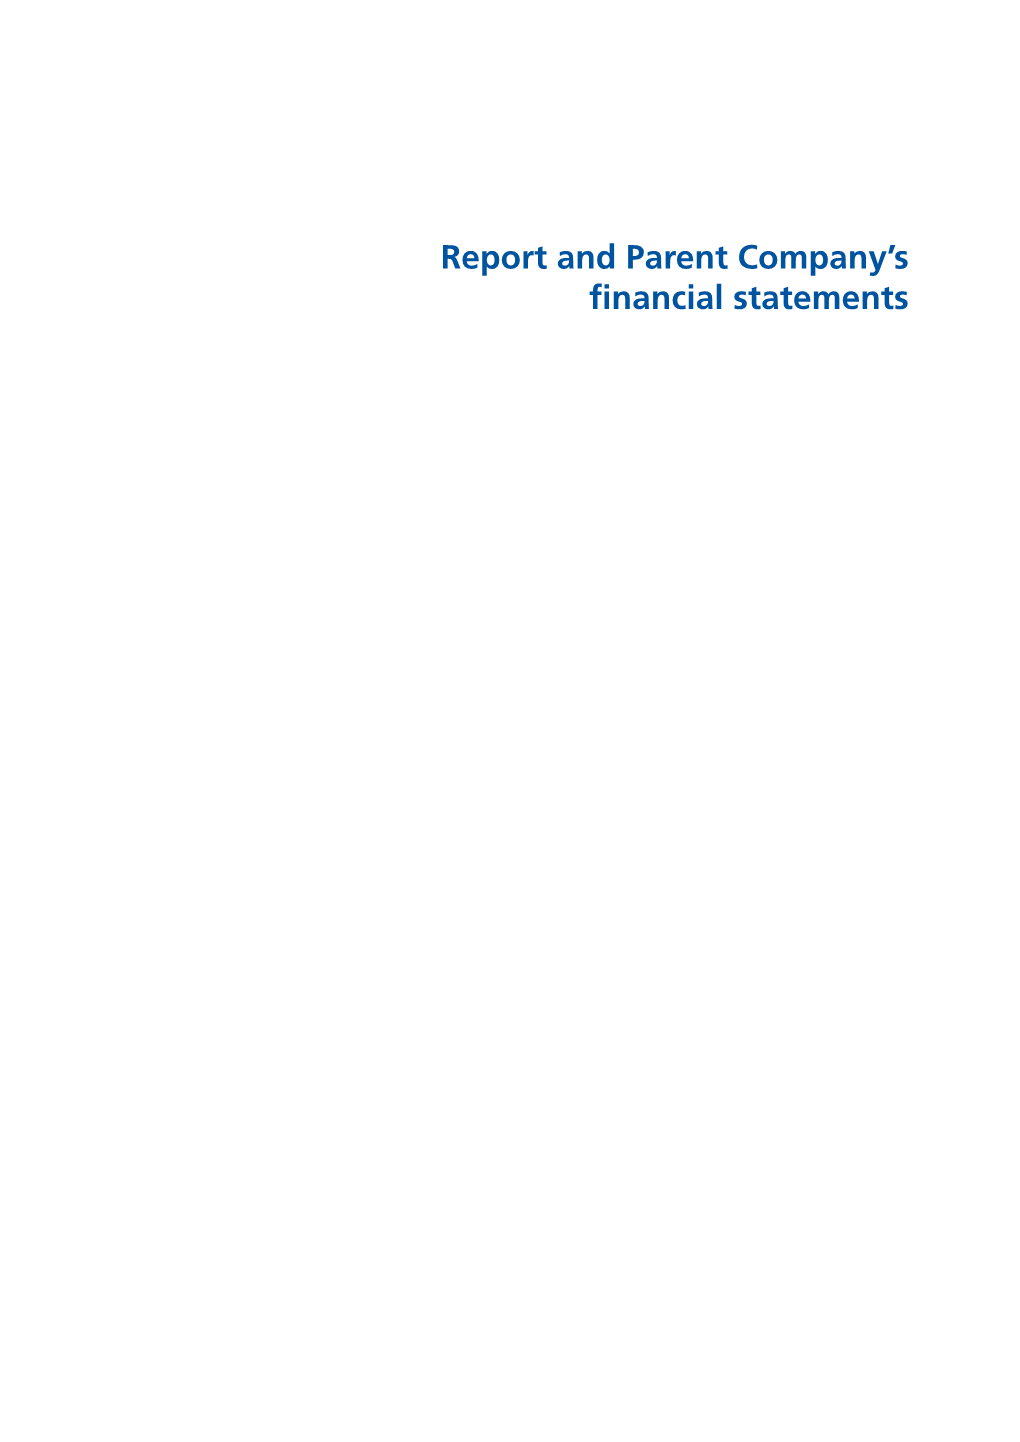 Report and Parent Company's Financial Statements